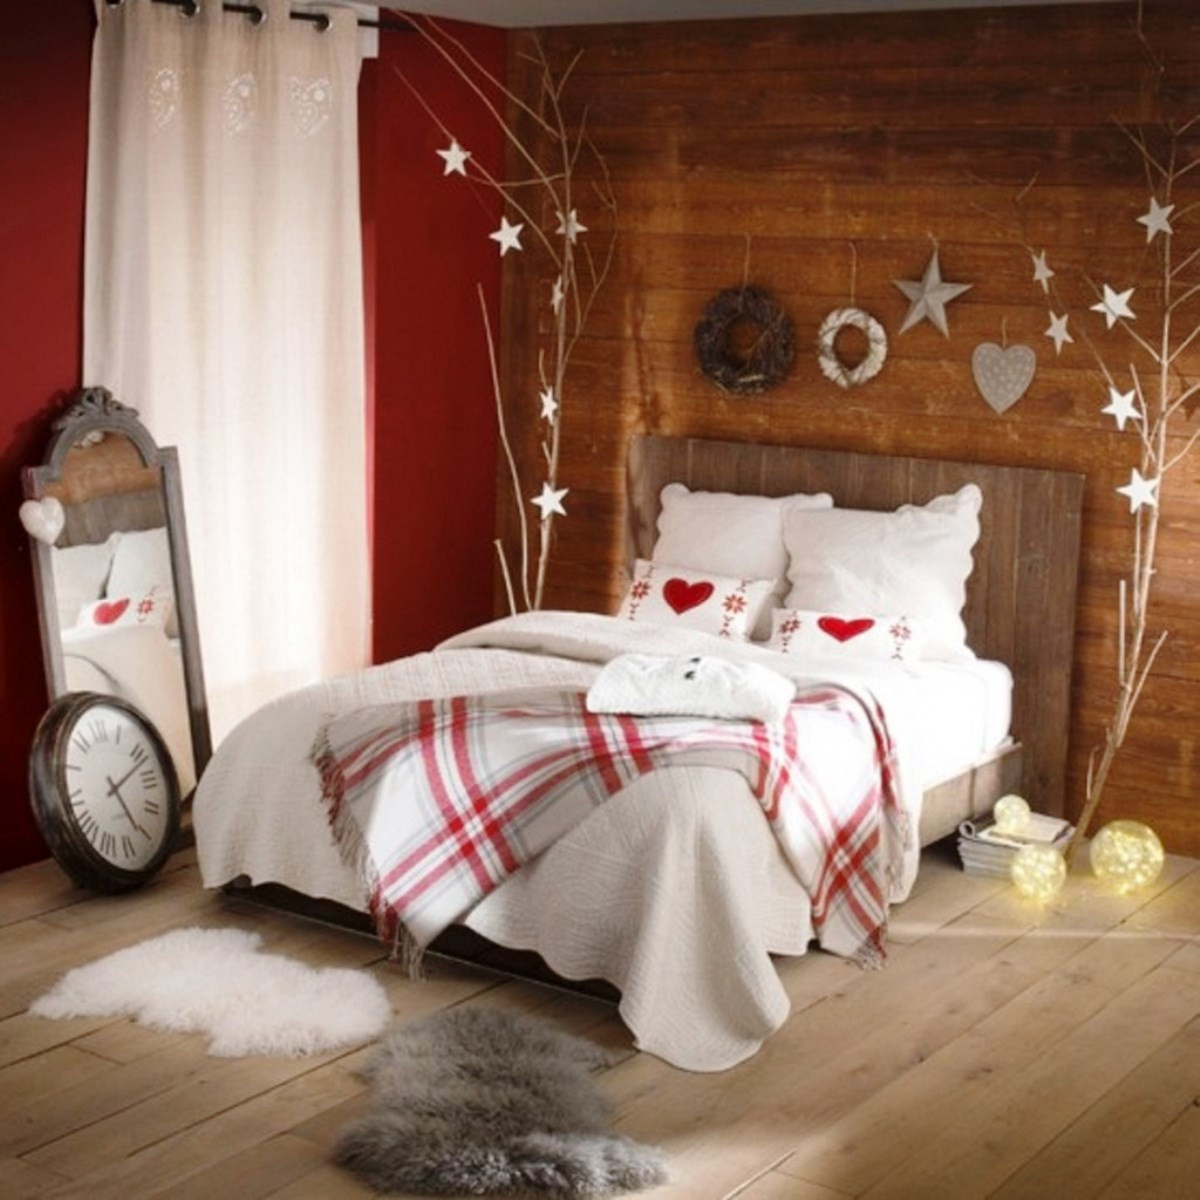 Christmas Decorated Bedroom
 30 Christmas Bedroom Decorations Ideas